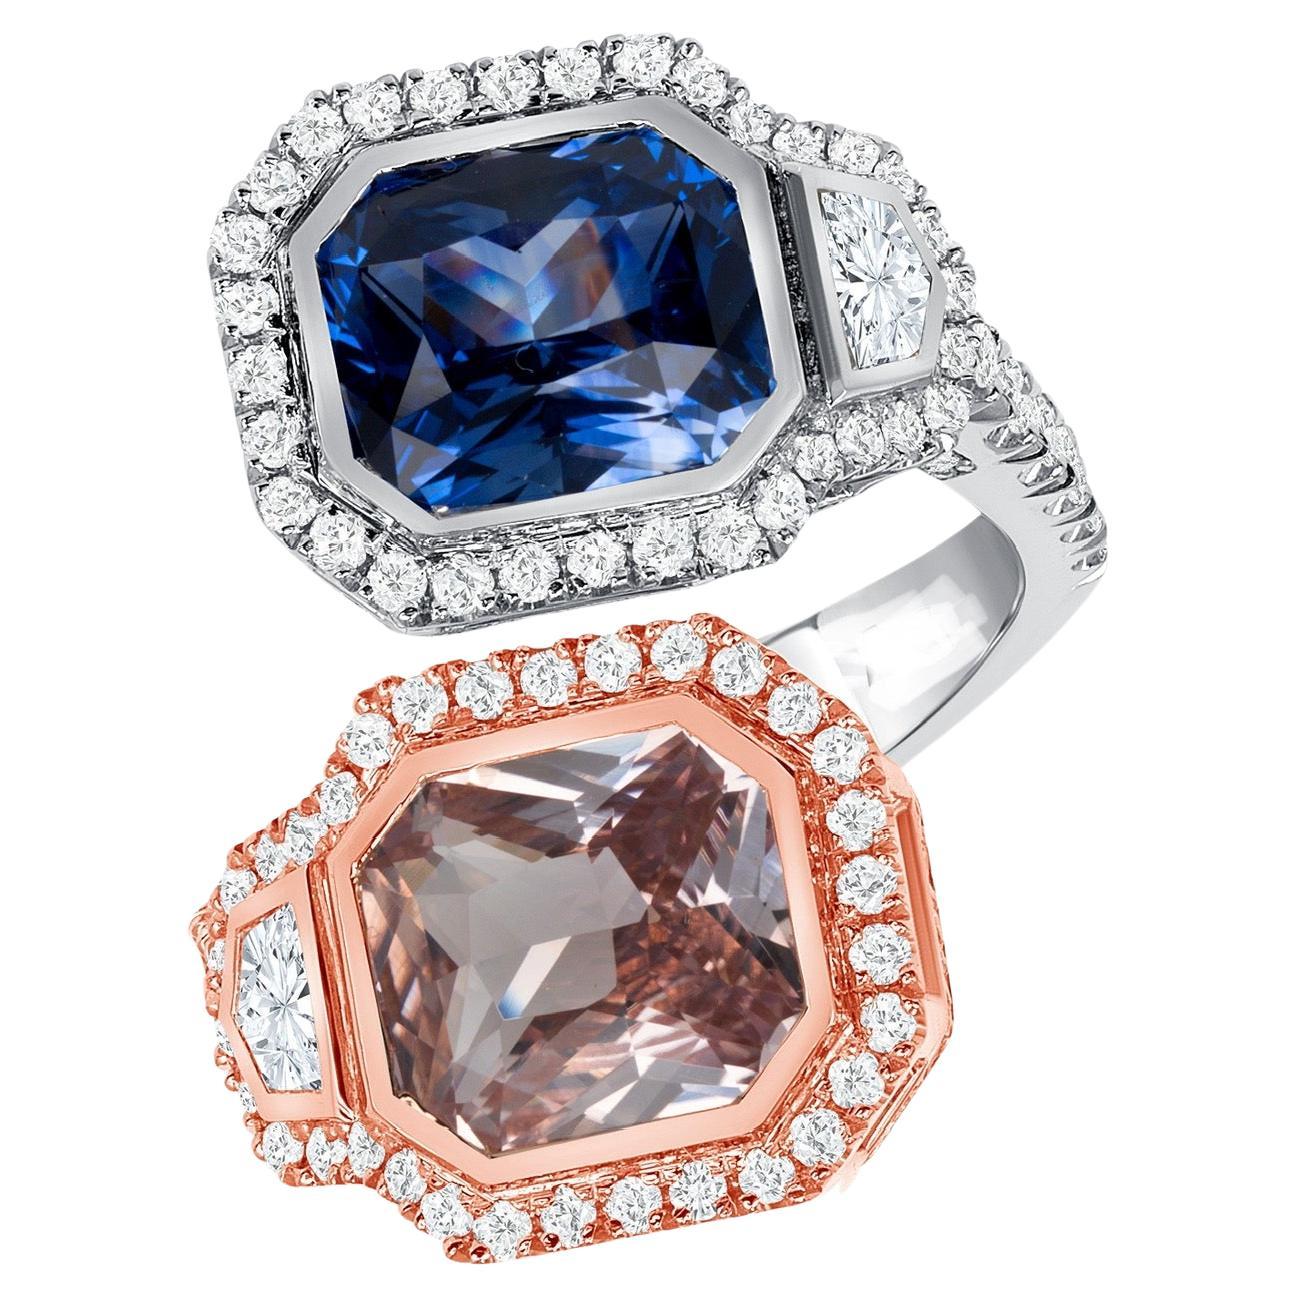 3.05ct Pink Sapphire and 3.38ct Blue Sapphire, radiant-cut  bypass ring. For Sale